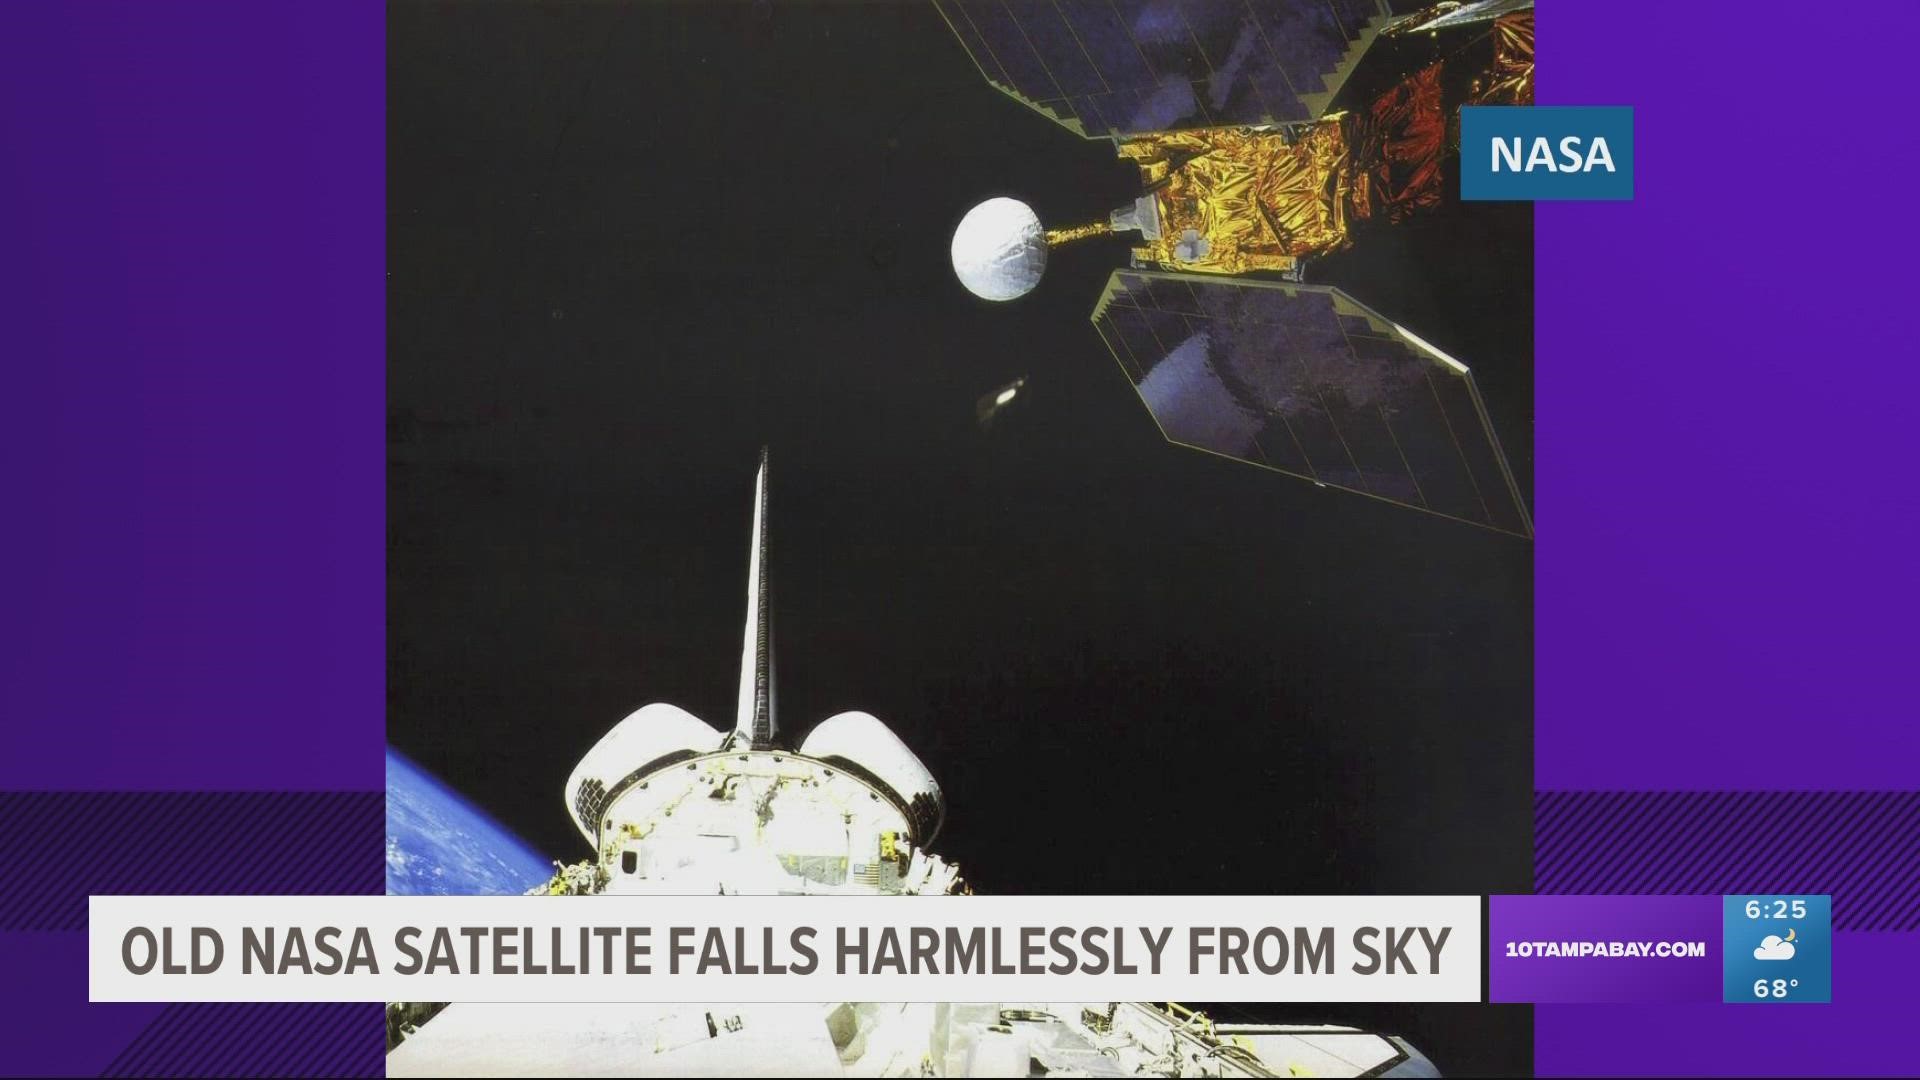 The 5,400-pound satellite reentered our atmosphere Sunday night.